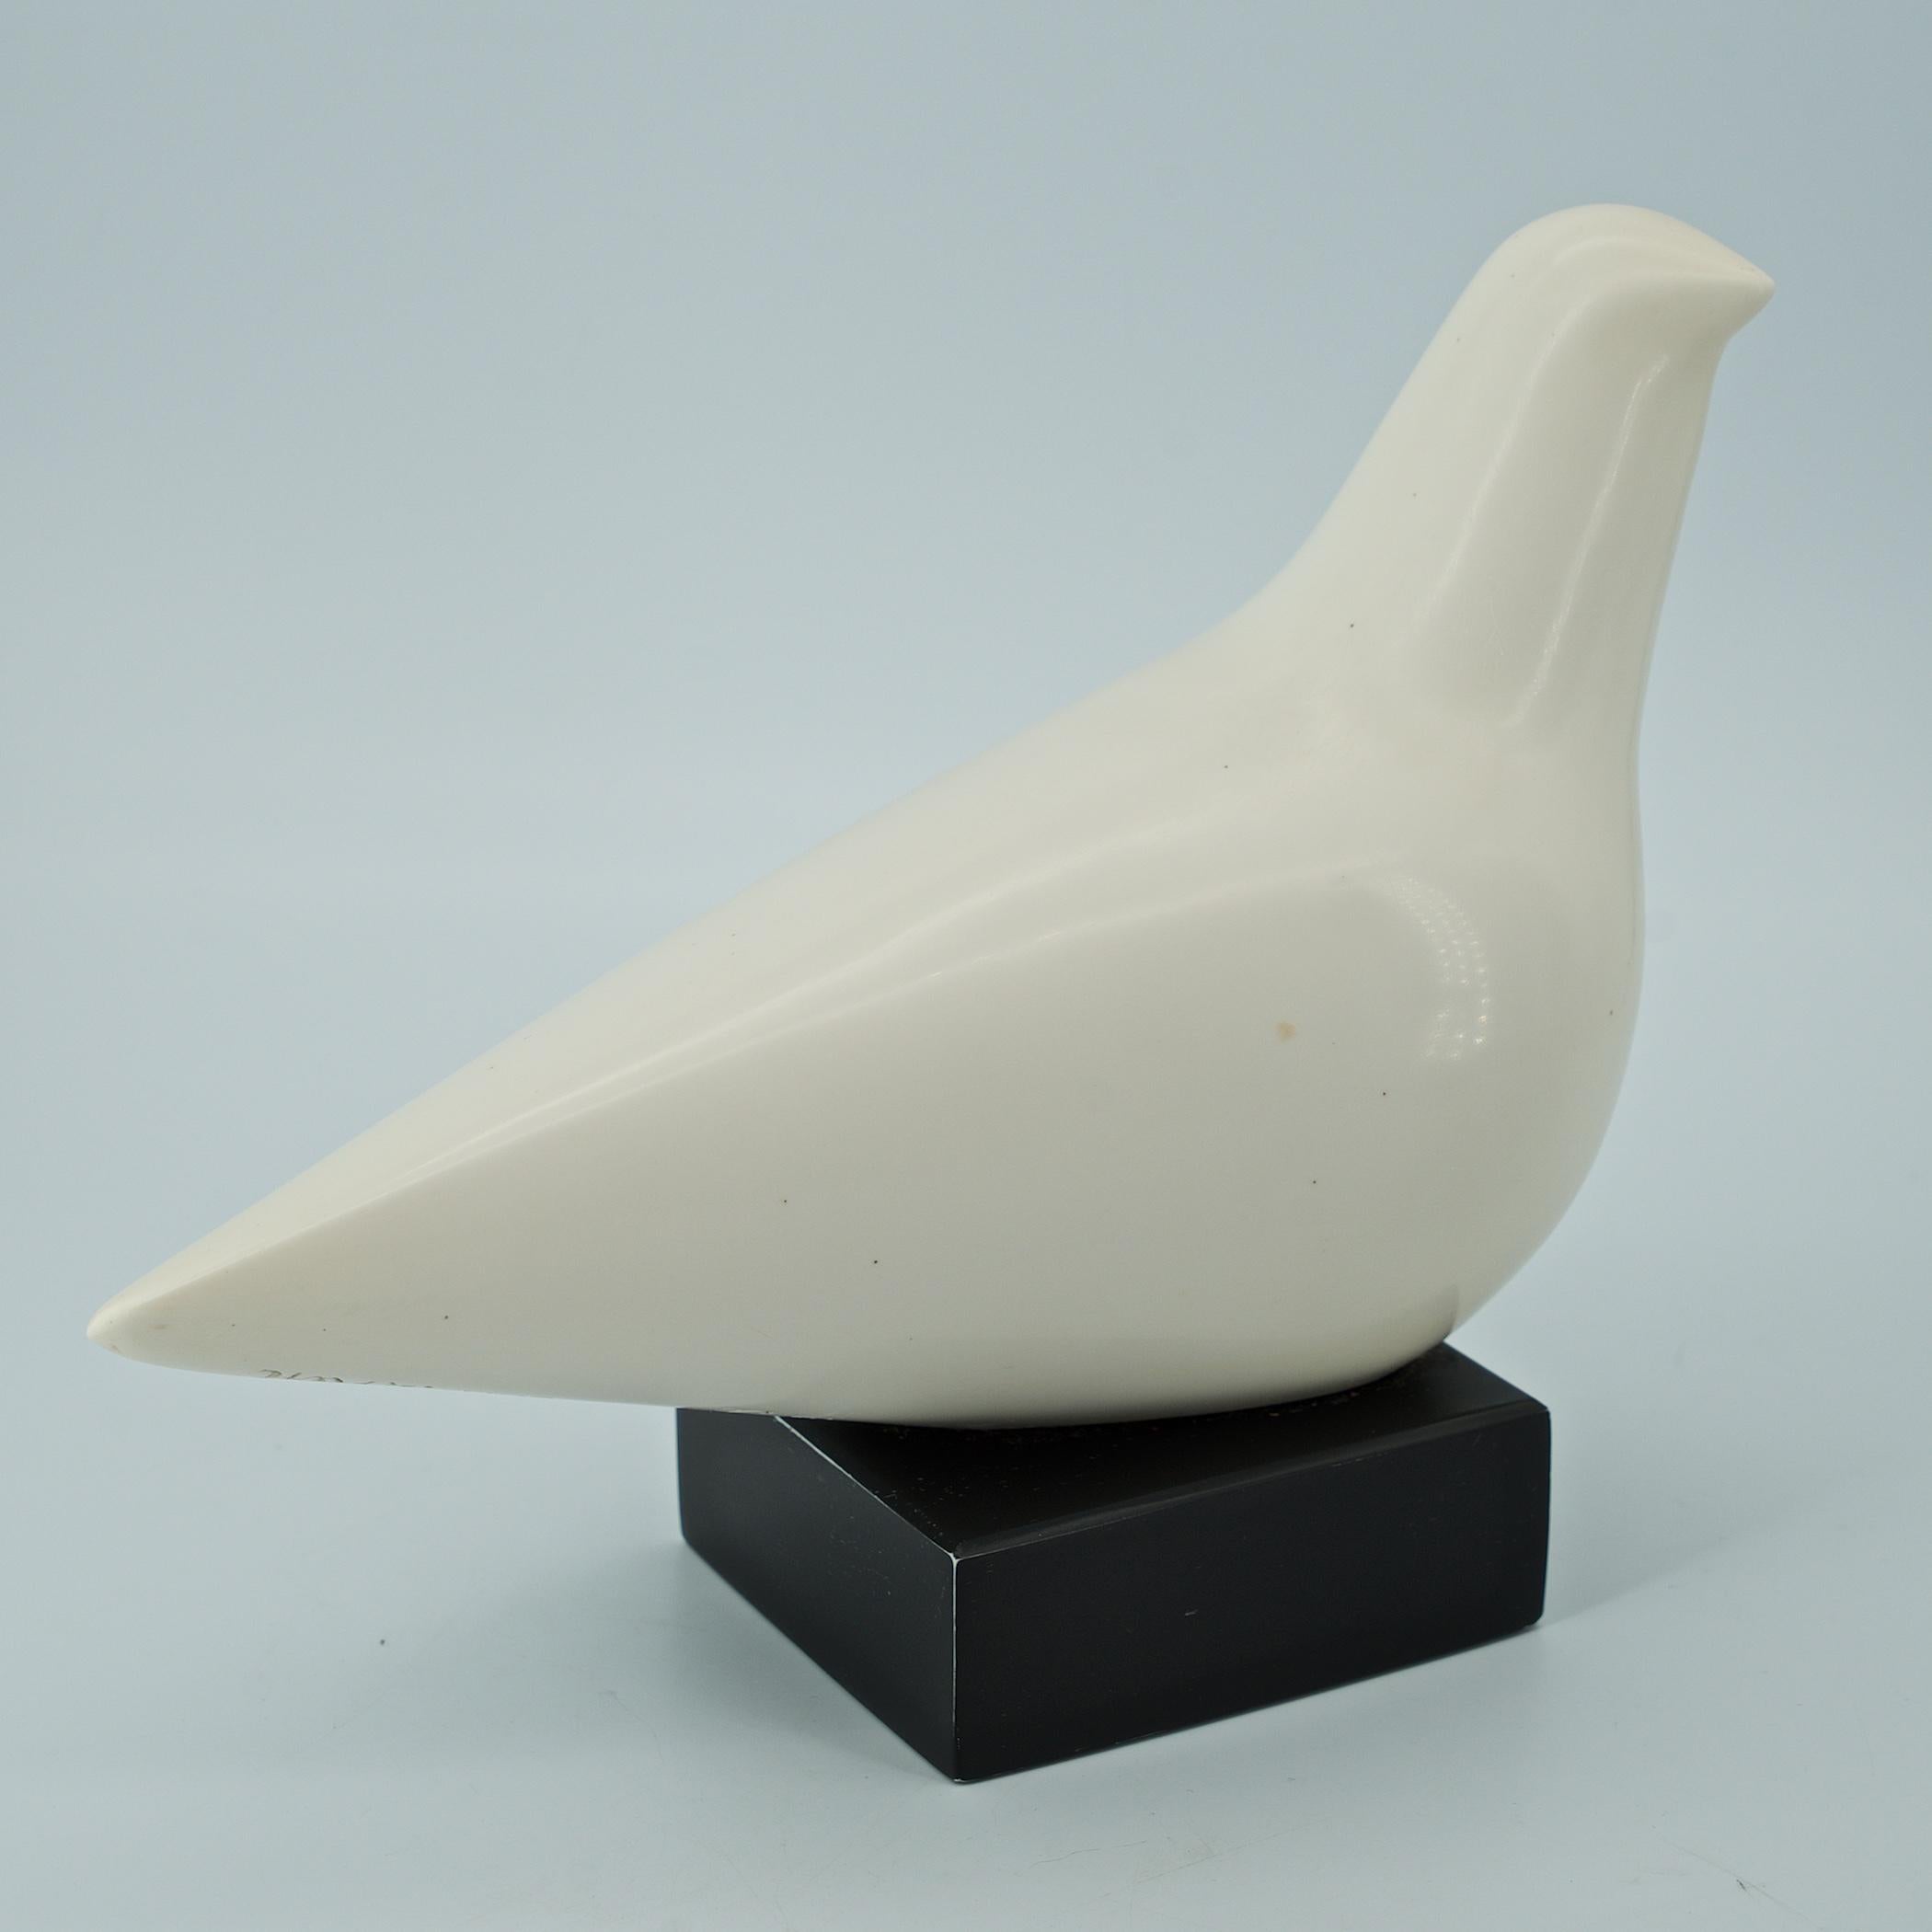 A very clean example of this now famous bird form sculpture by female artist Cleo Hartwig. This piece is 9 x 8, 5 lbs, and made of polished white marbelite/resin.

Signed in the mold, 